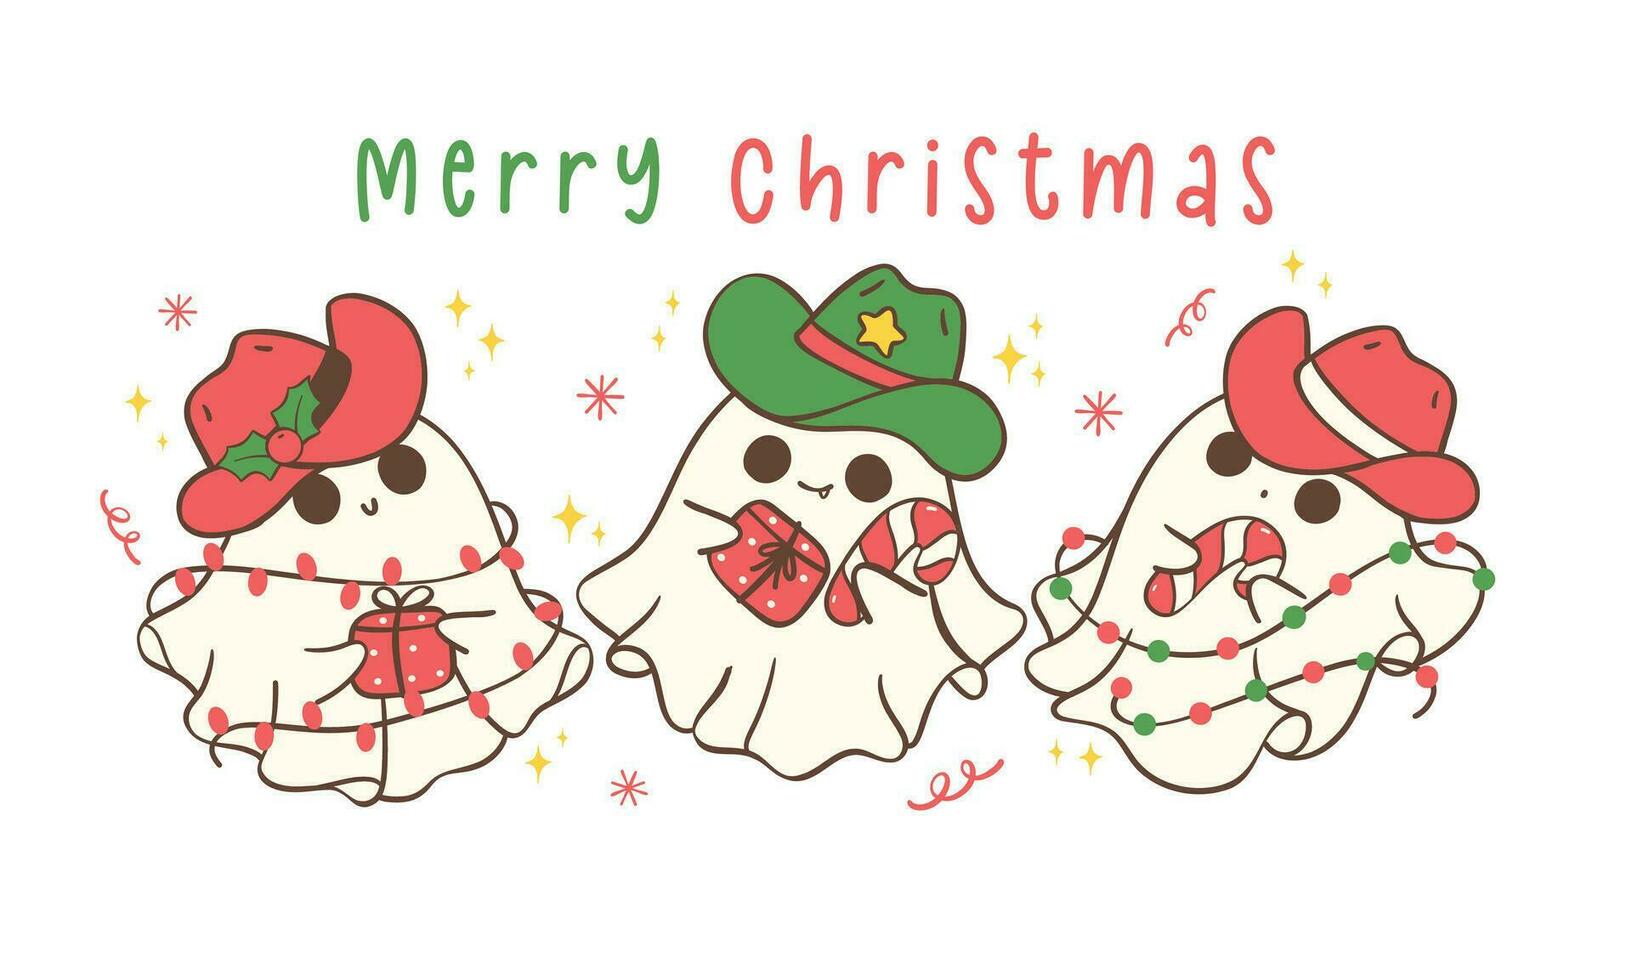 Group of Cute and Kawaii Christmas Cowboy Ghosts. Festive Holiday Banner Cartoon Hand Drawing with Adorable Pose vector